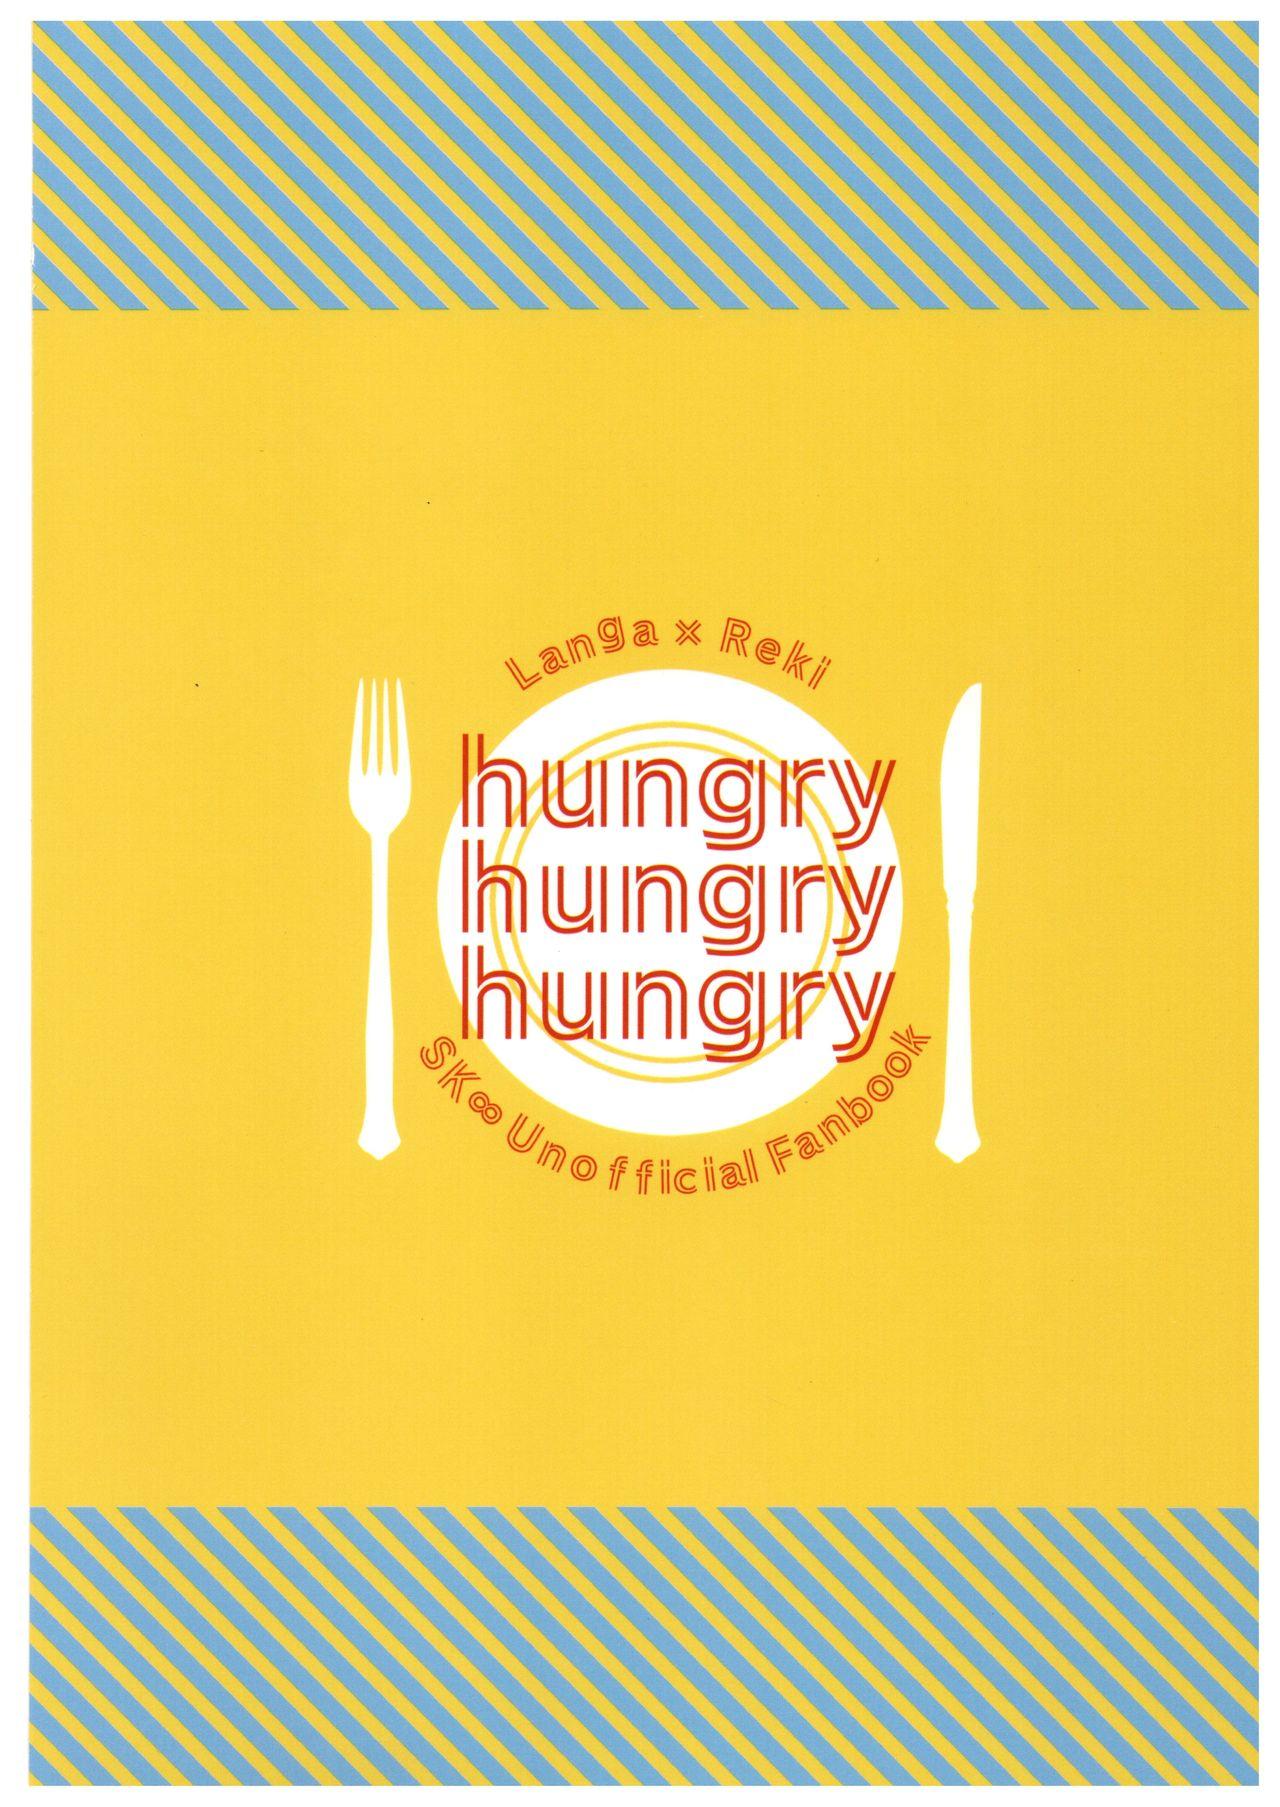 hungry hungry hungry 29